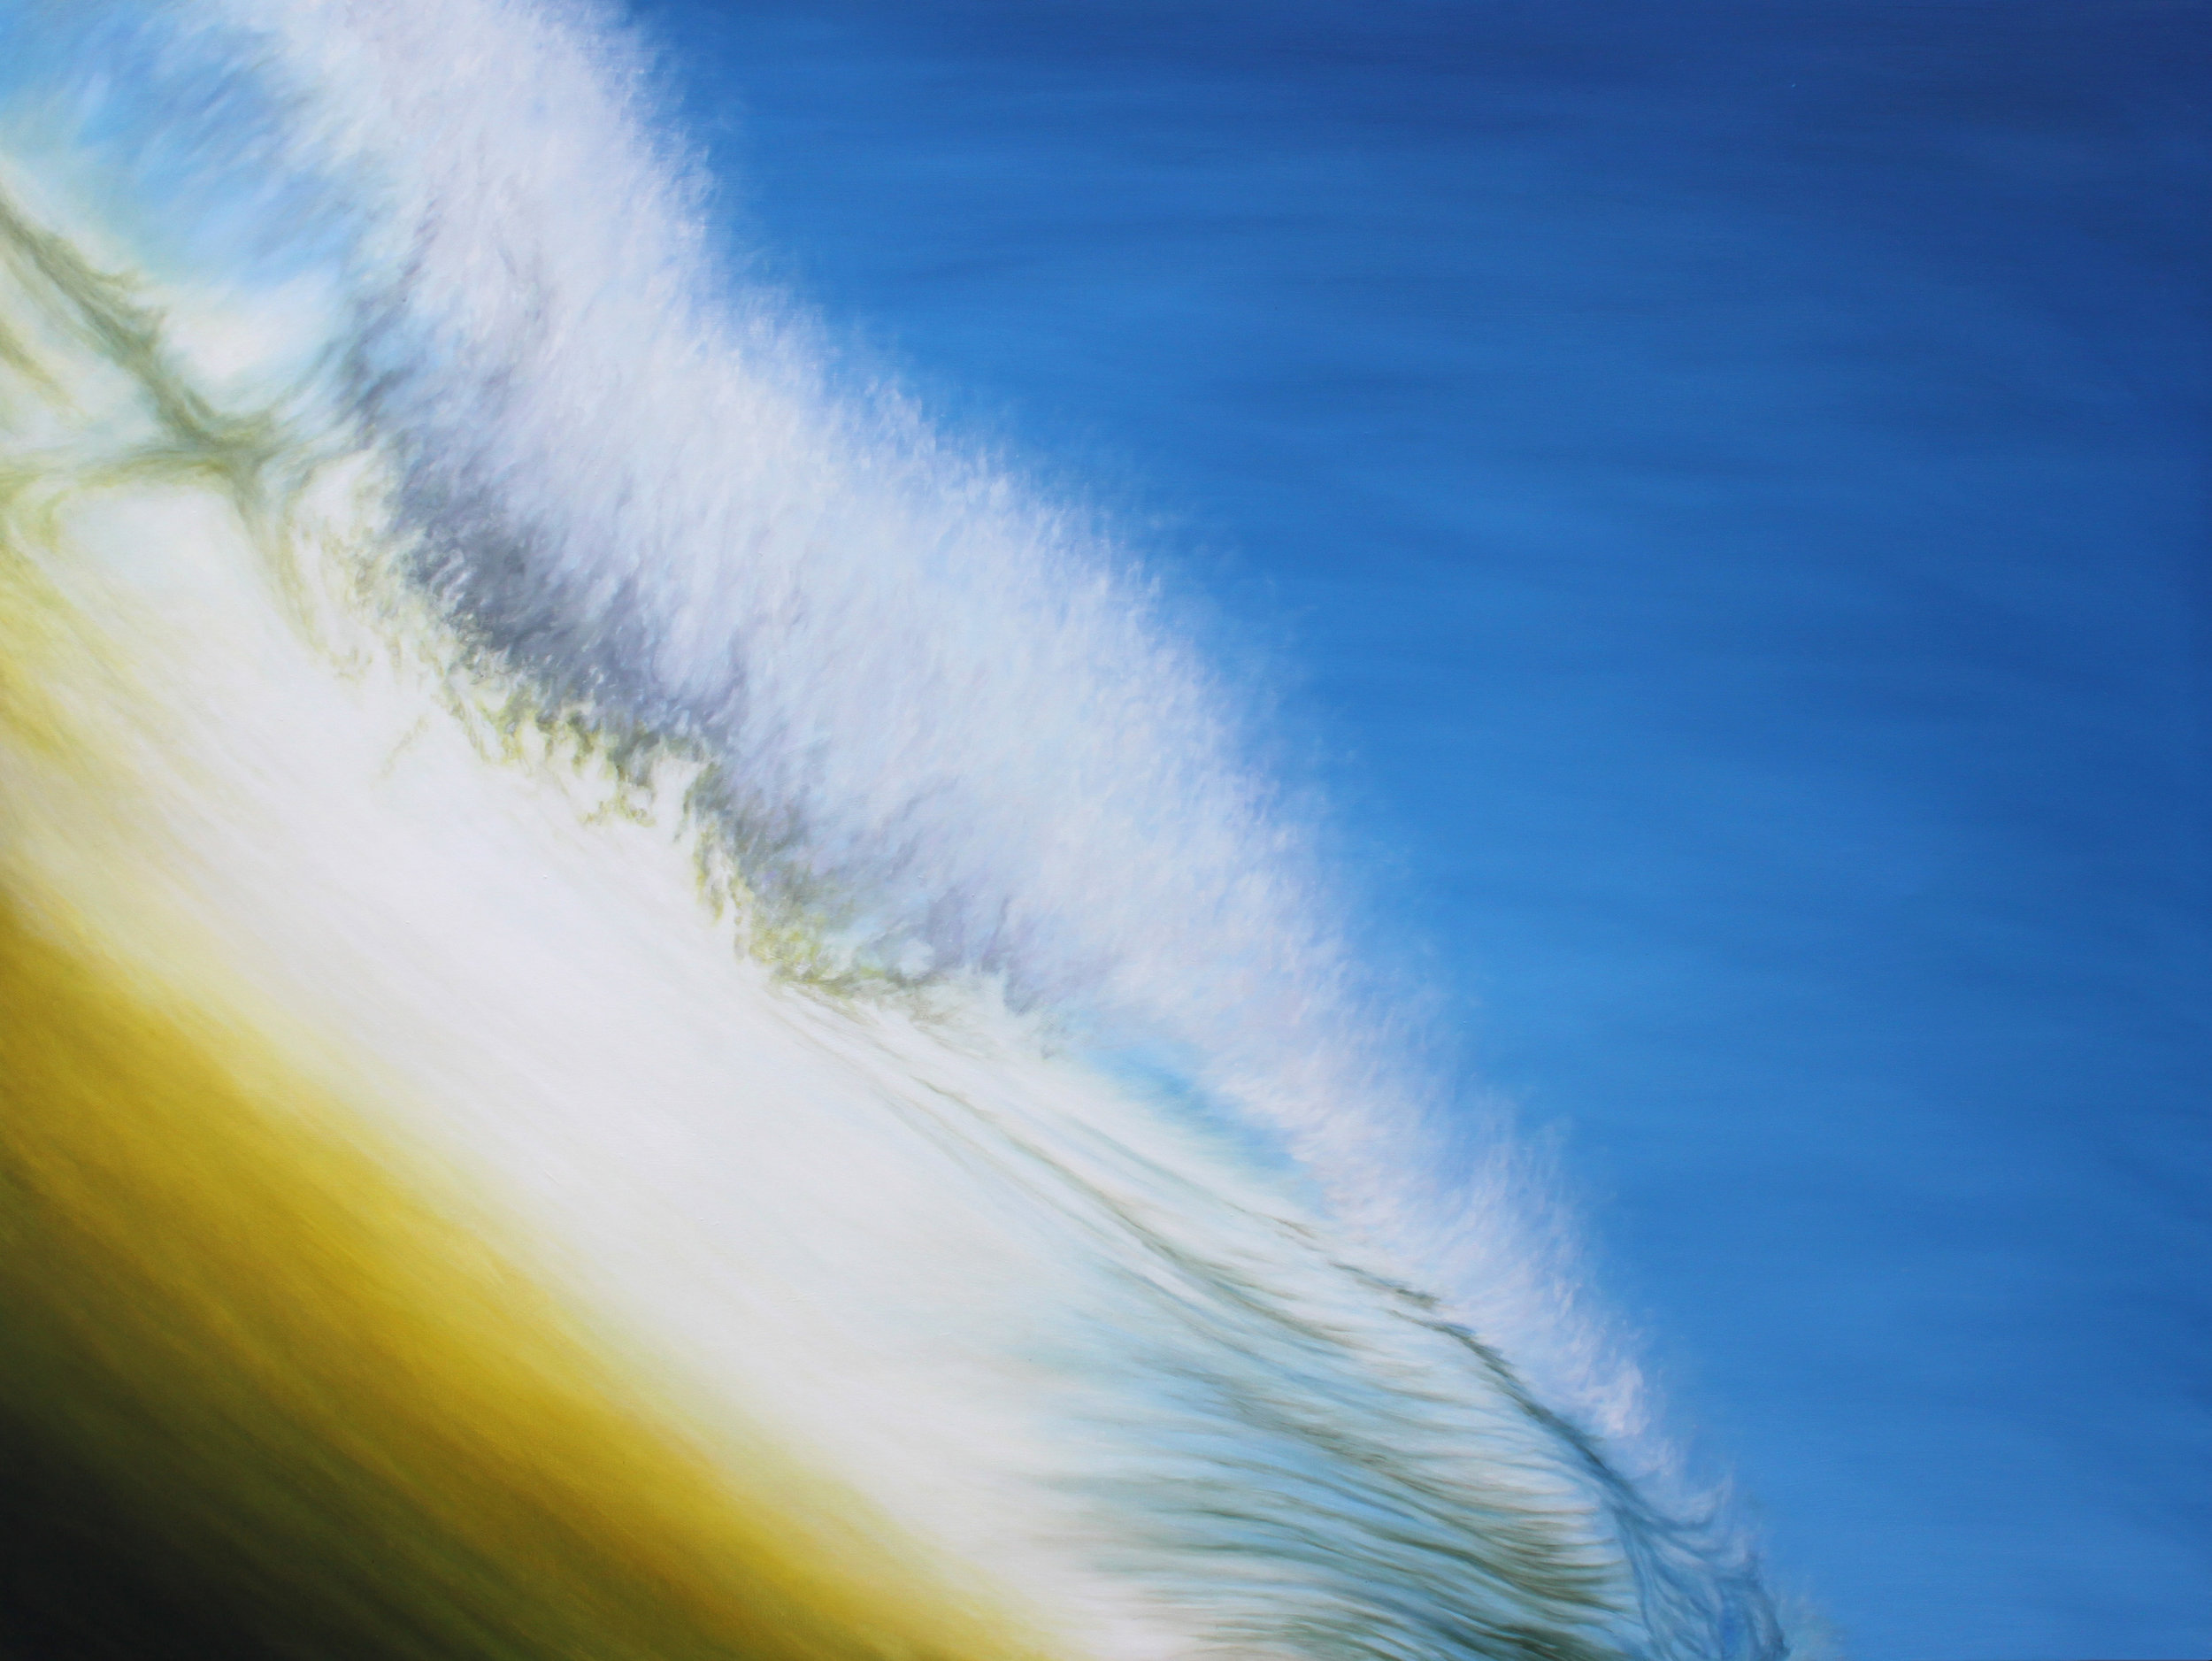  “Gold Tide”   Oil on Canvas    32"x48"    Original-Sold    Prints Available    